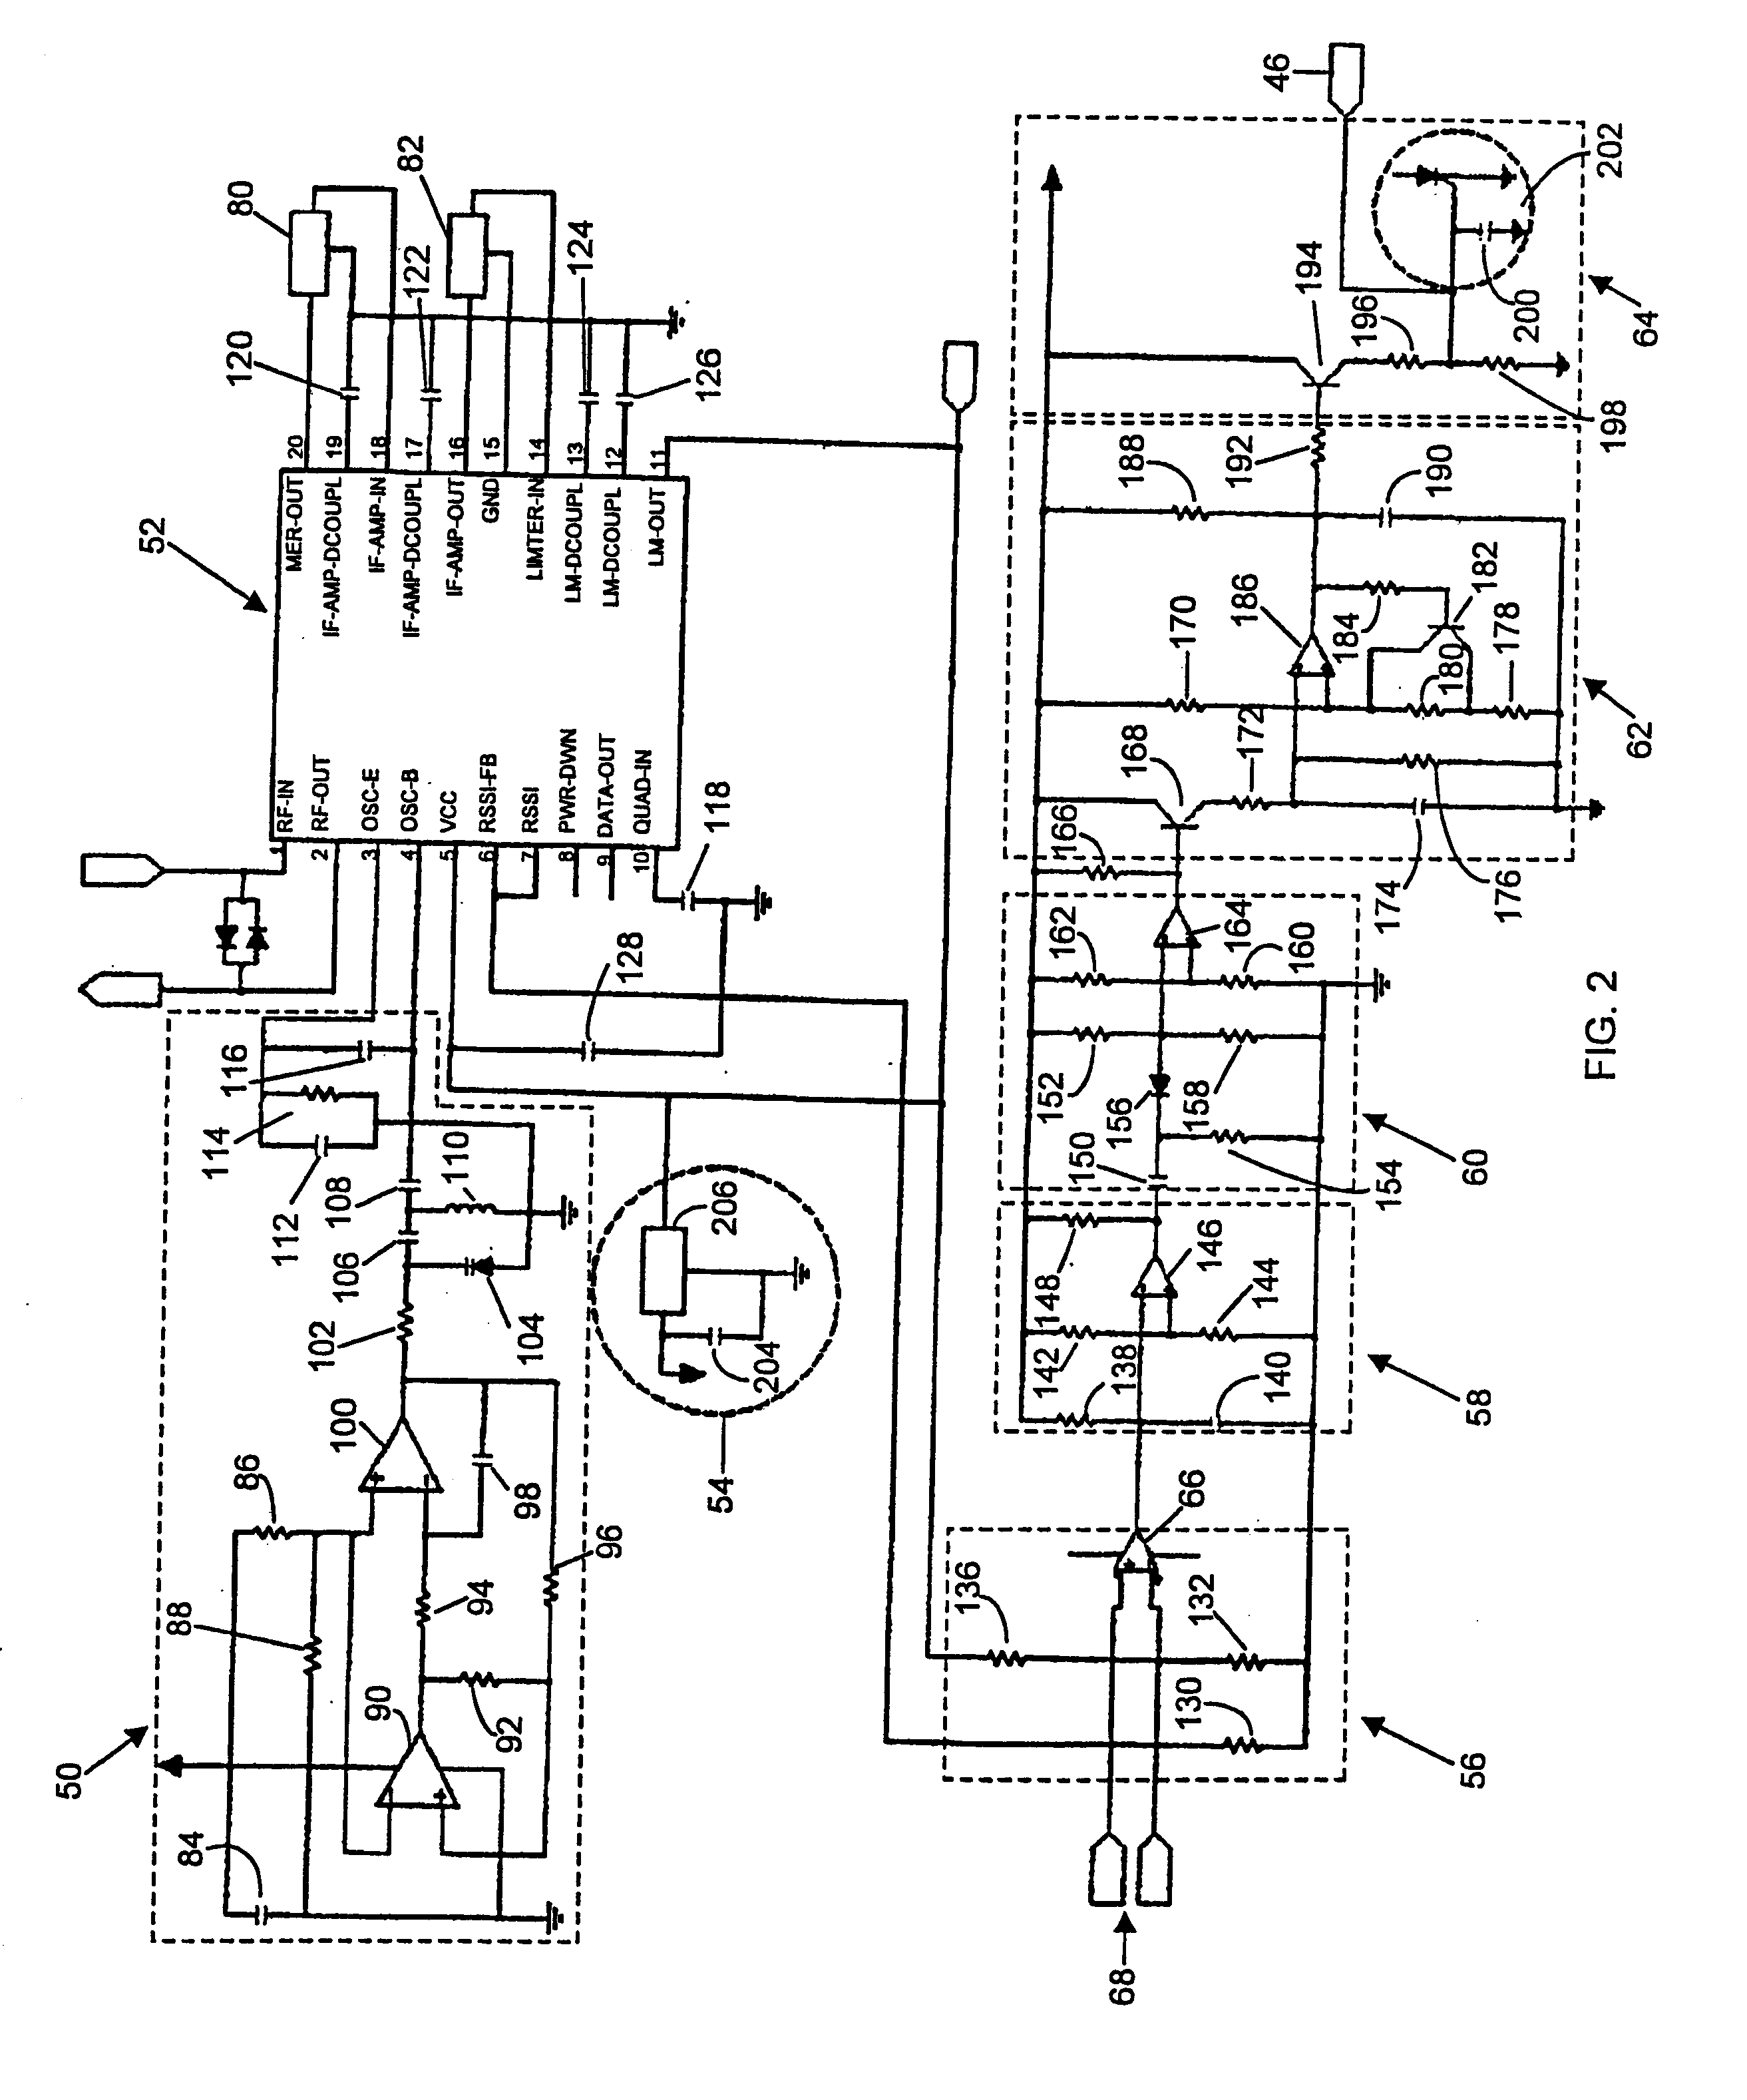 Vehicle electrical system arc detection apparatus and method